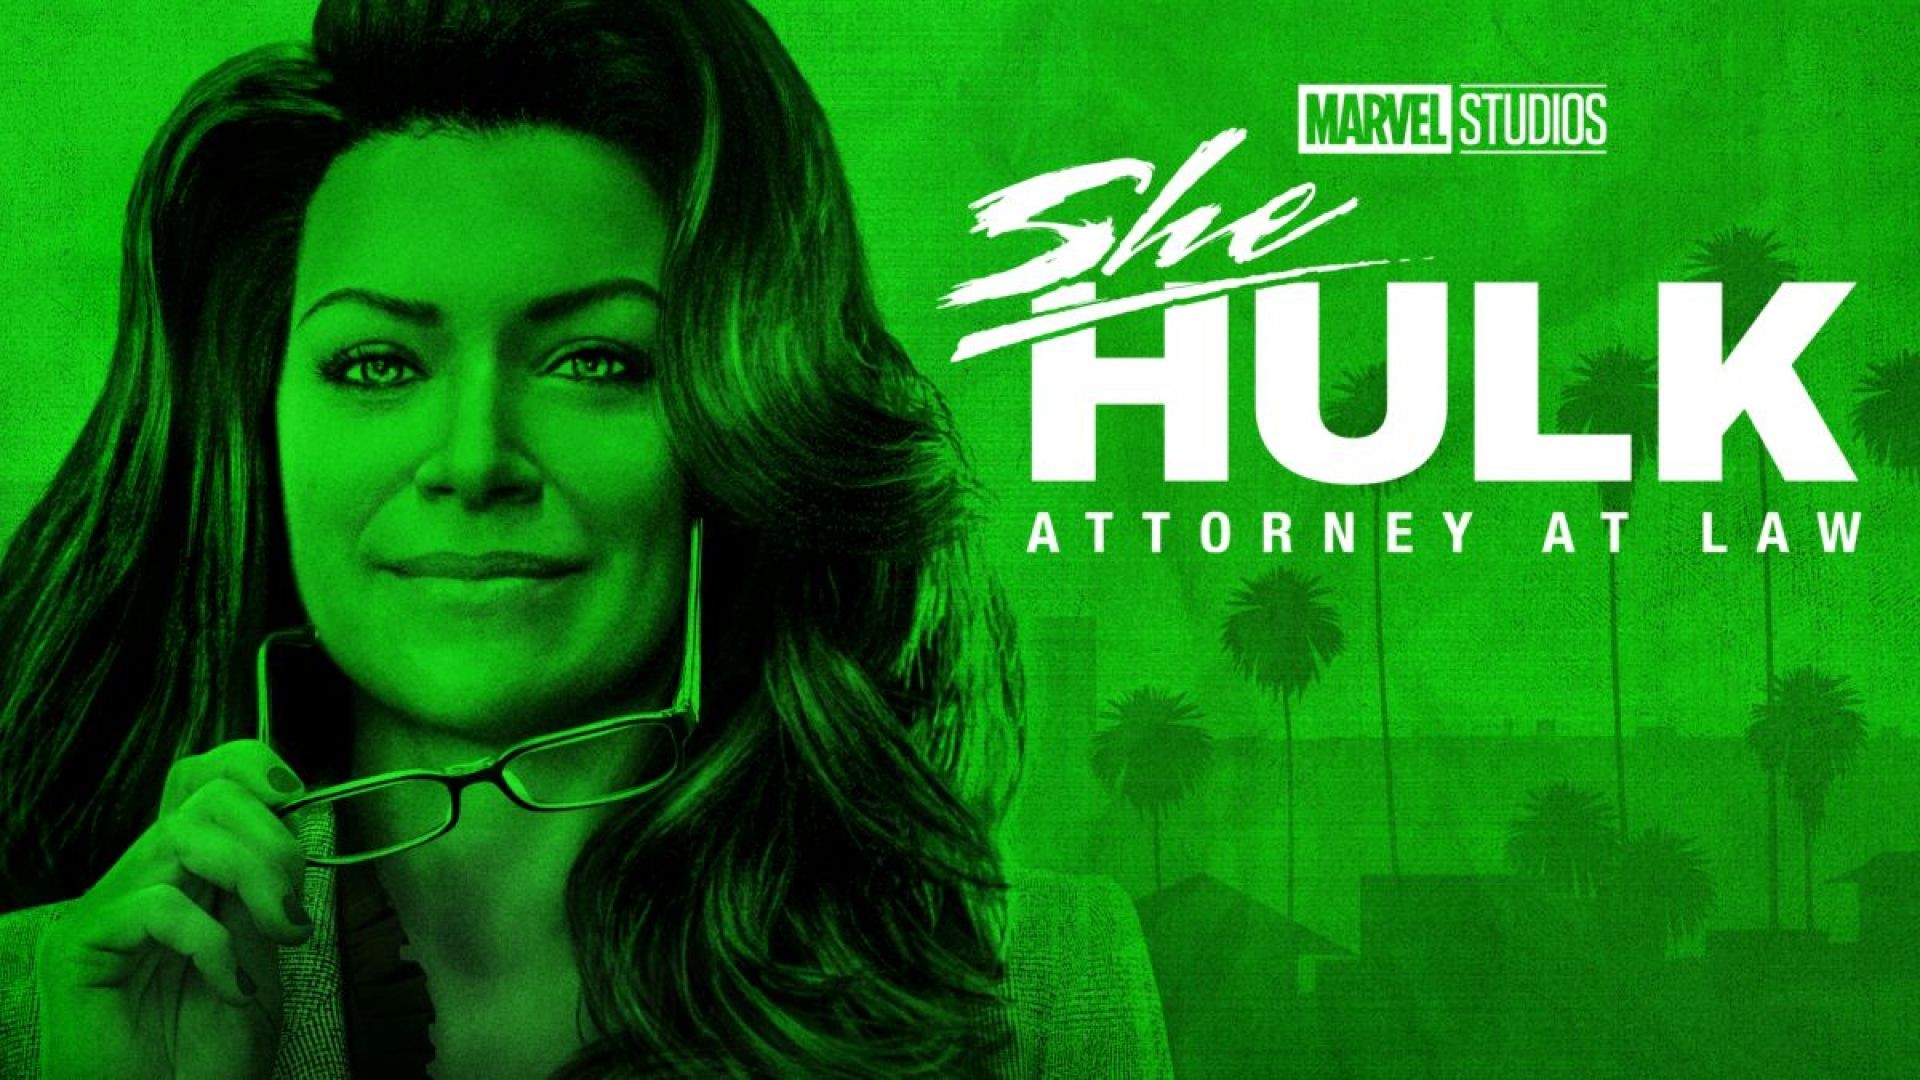 She-Hulk Attorney at Law S01E09 - Whose Show is This